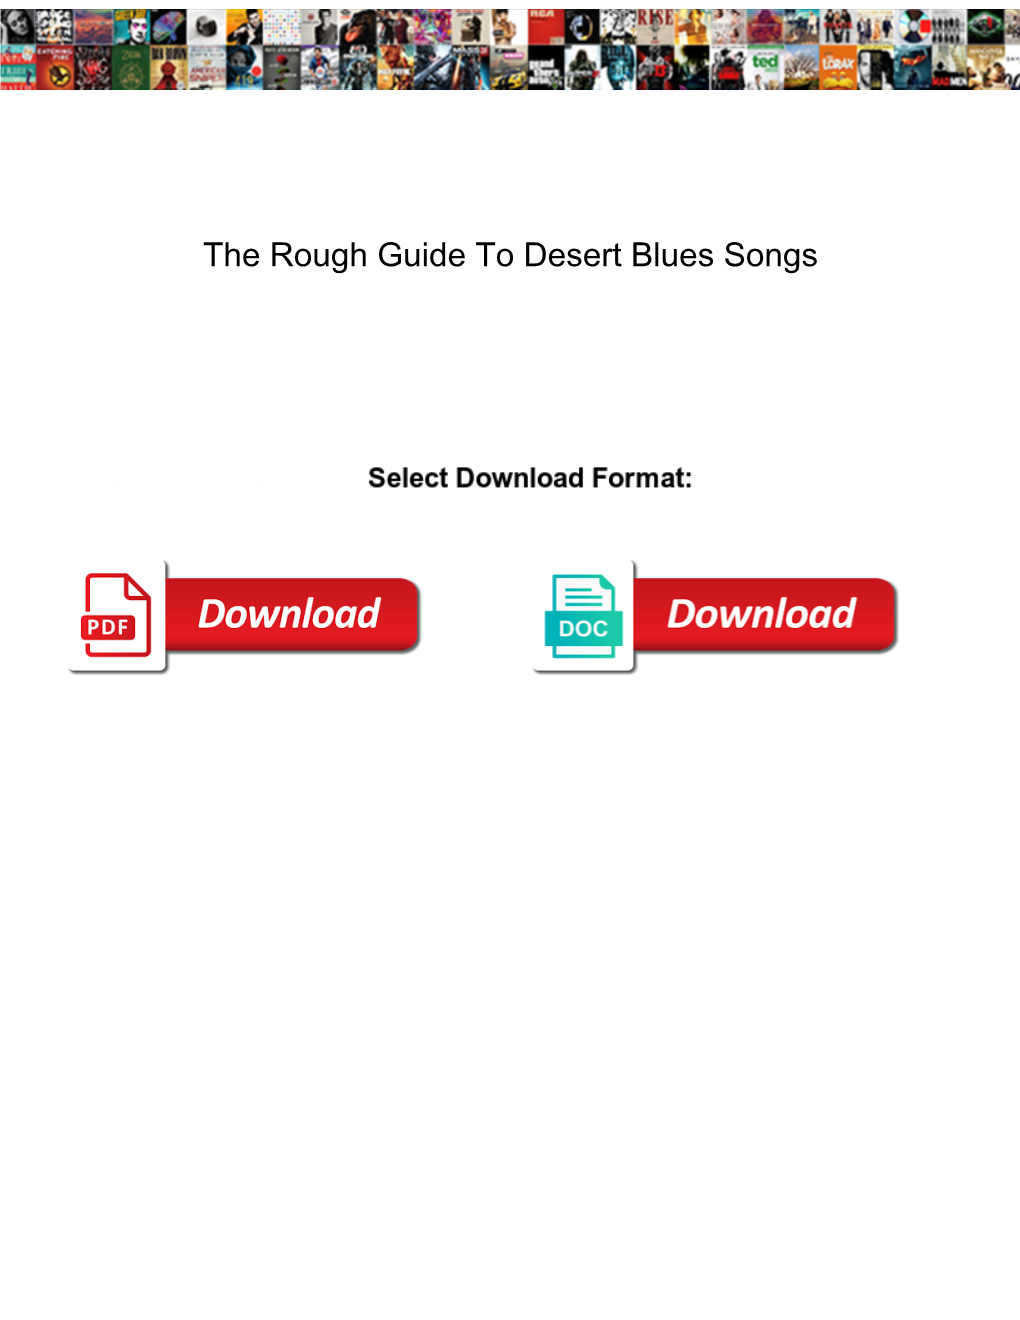 The Rough Guide to Desert Blues Songs Recovery